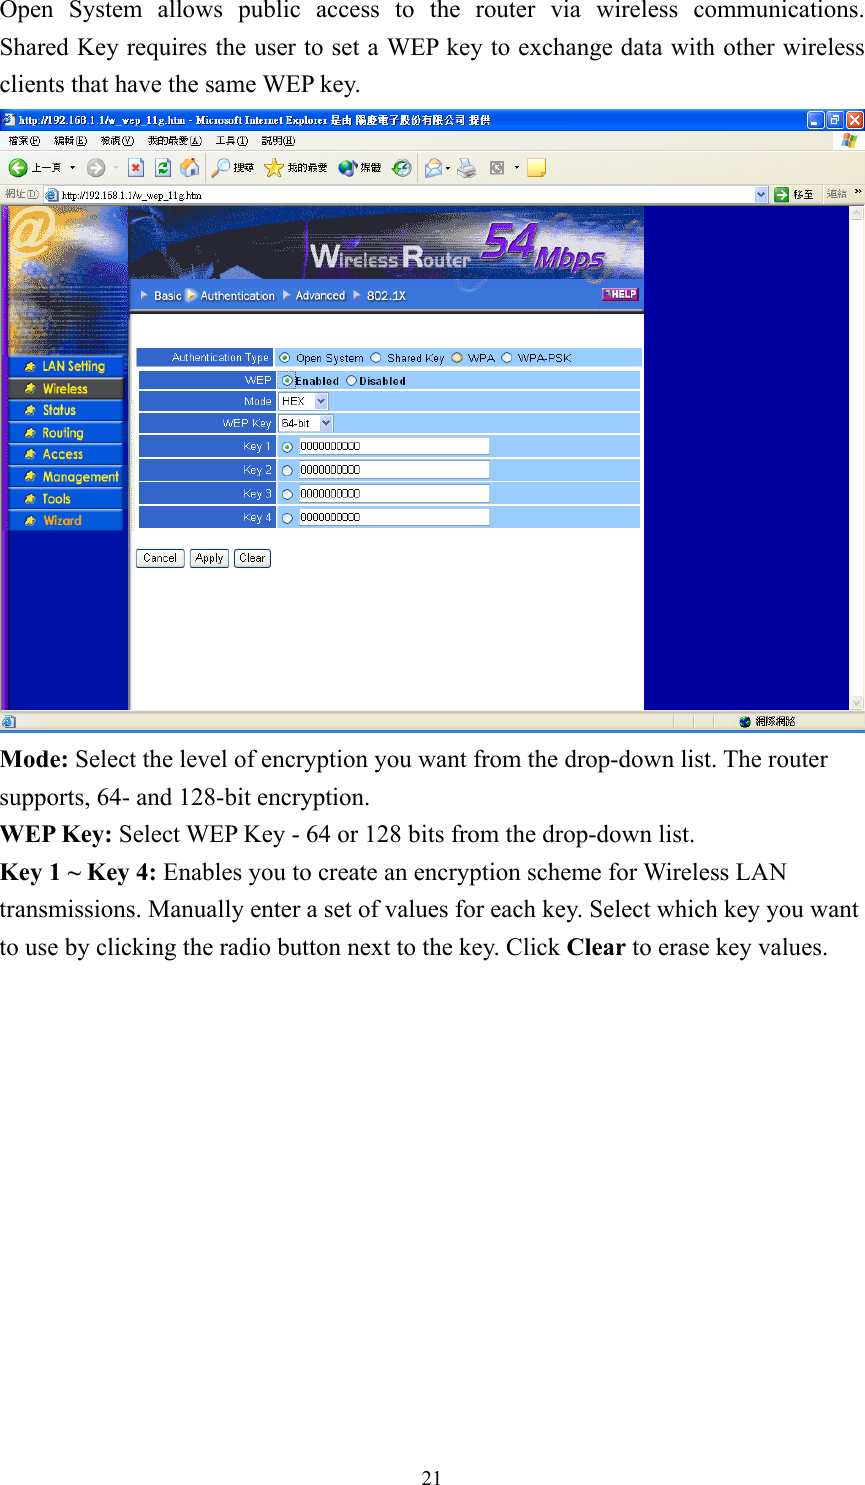 Open System allows public access to the router via wireless communications.  Shared Key requires the user to set a WEP key to exchange data with other wireless clients that have the same WEP key.  Mode: Select the level of encryption you want from the drop-down list. The router supports, 64- and 128-bit encryption. WEP Key: Select WEP Key - 64 or 128 bits from the drop-down list. Key 1 ~ Key 4: Enables you to create an encryption scheme for Wireless LAN transmissions. Manually enter a set of values for each key. Select which key you want to use by clicking the radio button next to the key. Click Clear to erase key values.   21